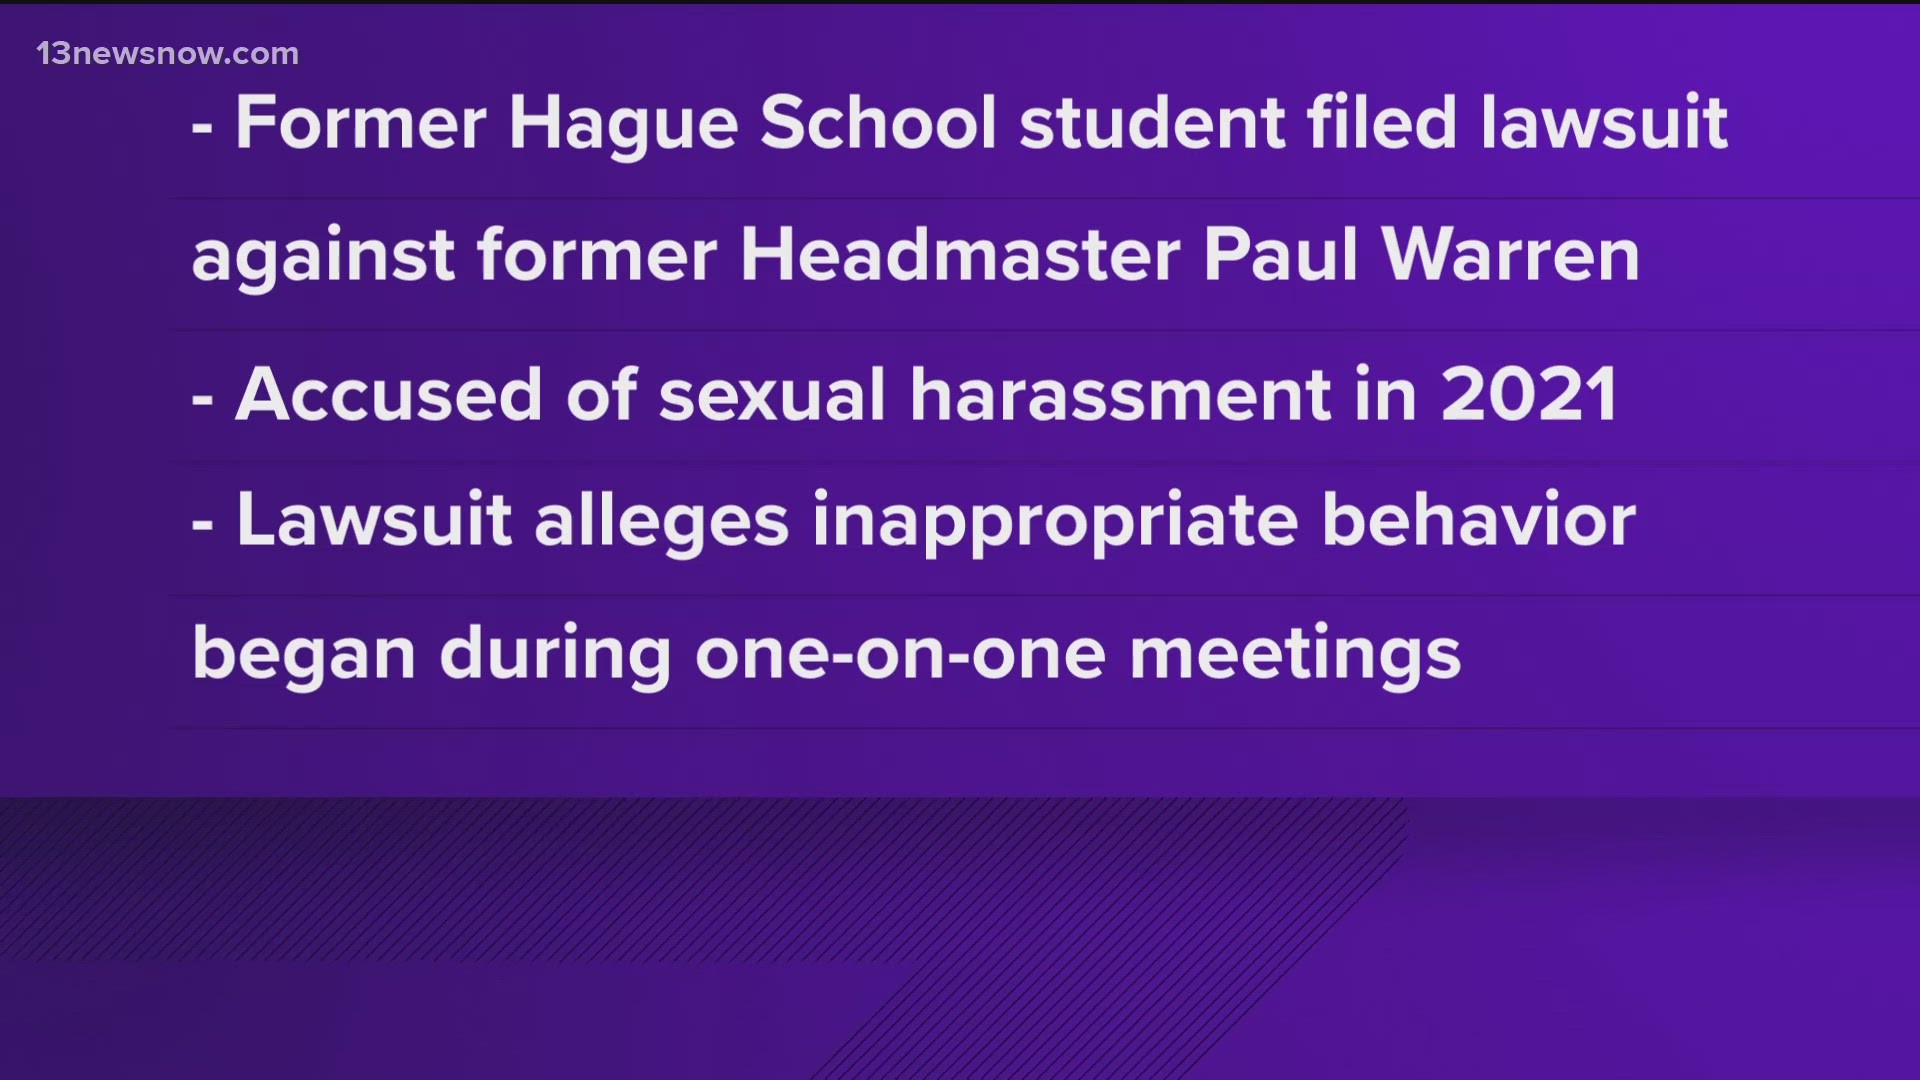 Keelin Hogan filed the lawsuit on Monday, accusing Paul Warren of inappropriate activity when she was a 16-year-old student.